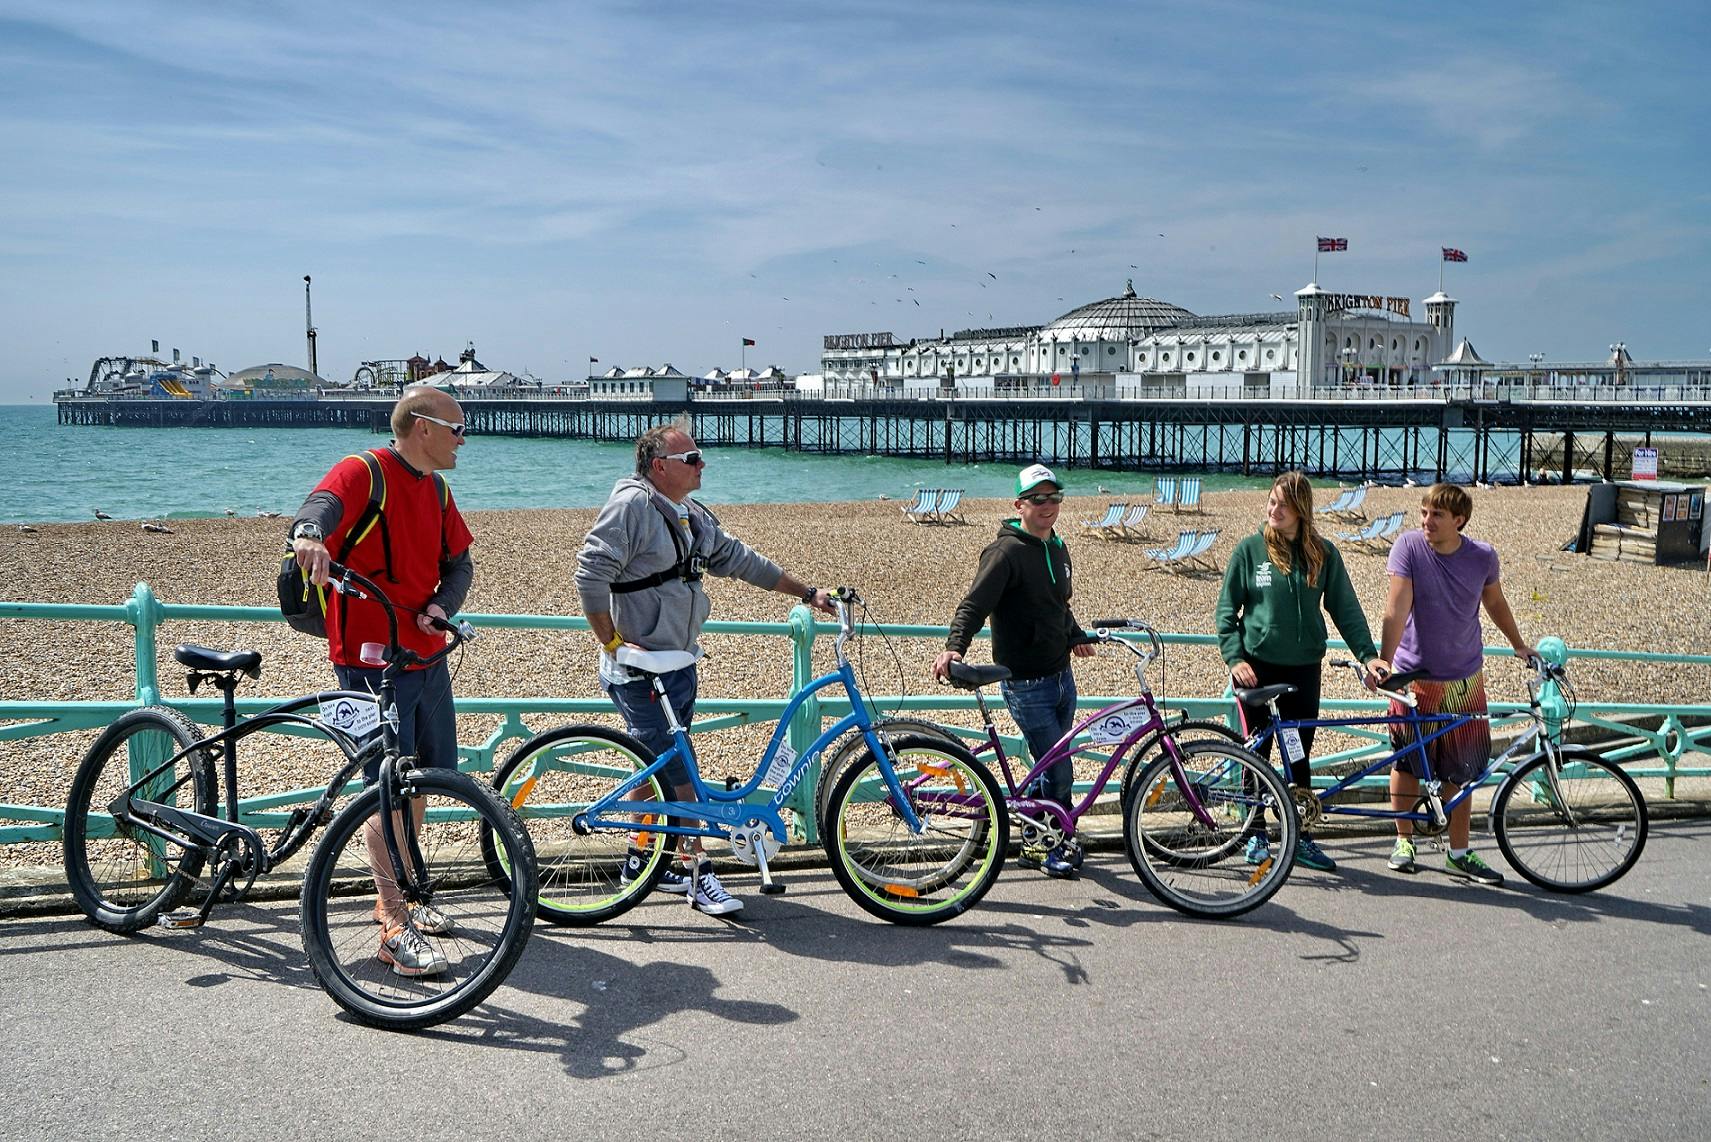 Cycle along the beachfront with Brighton Beach Bikes hire